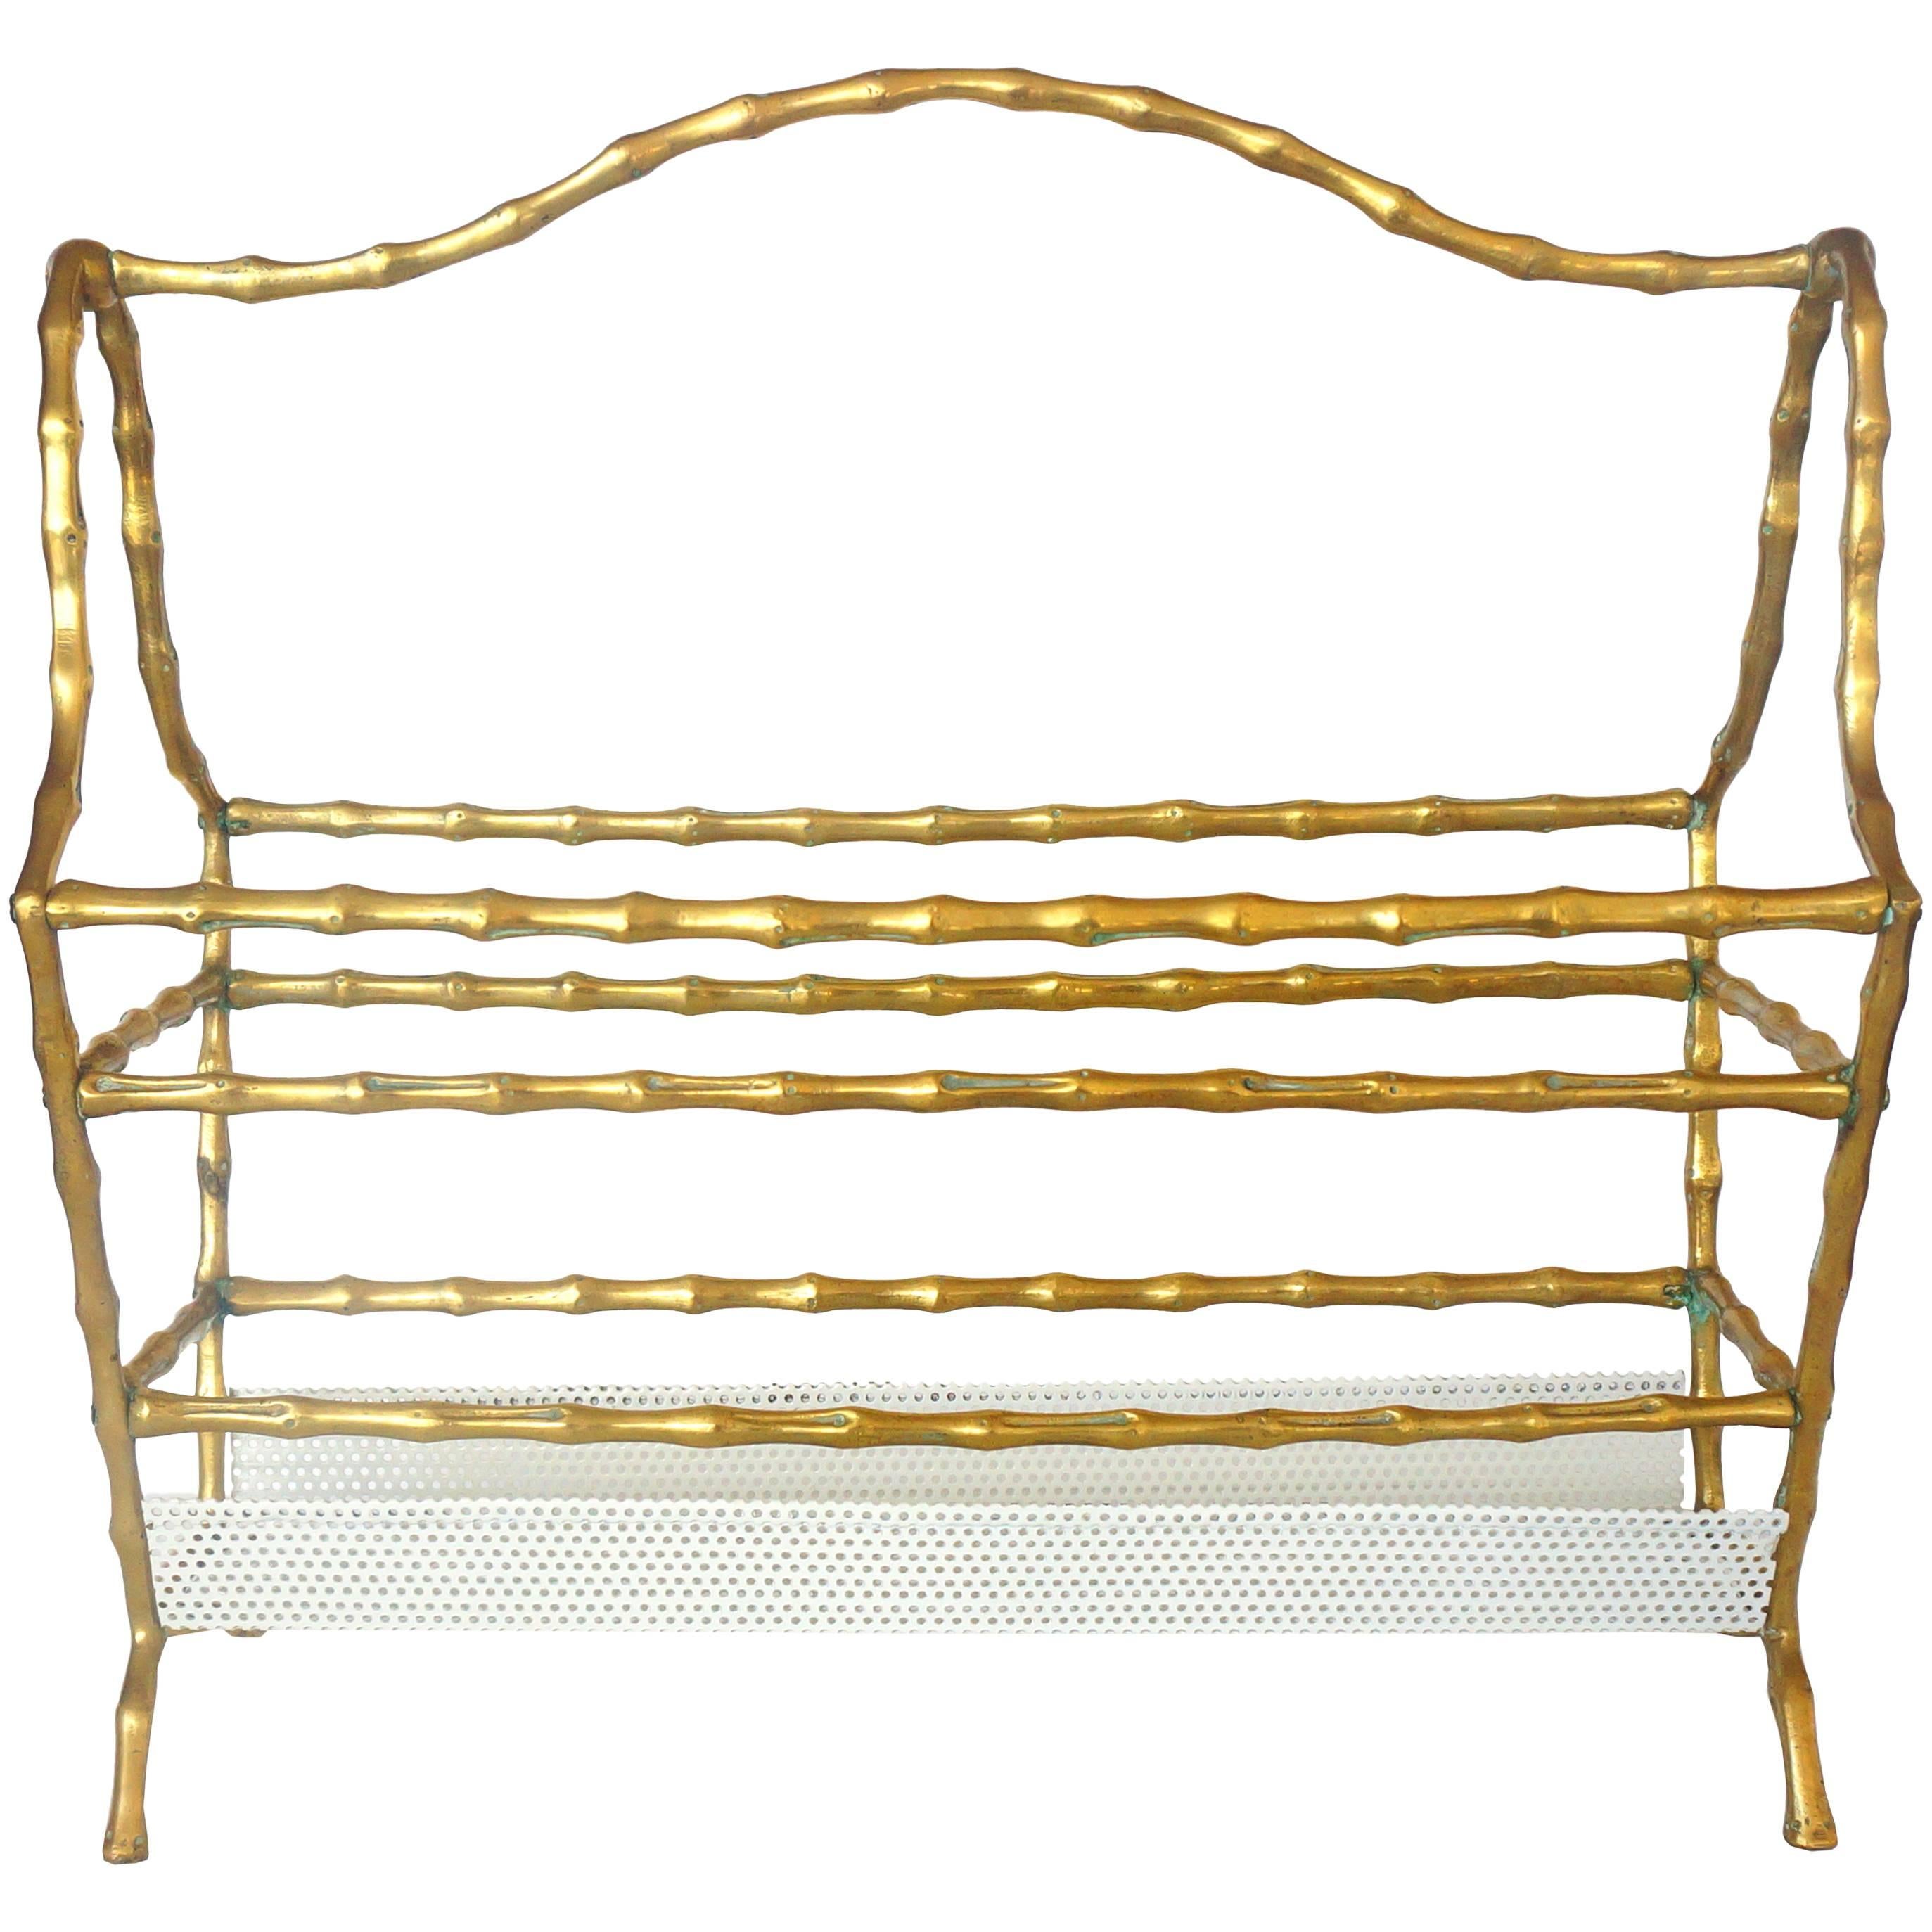 Hollywood-Regency Style, Faux-Bamboo Magazine Stand, Bronze and Enameled Metal